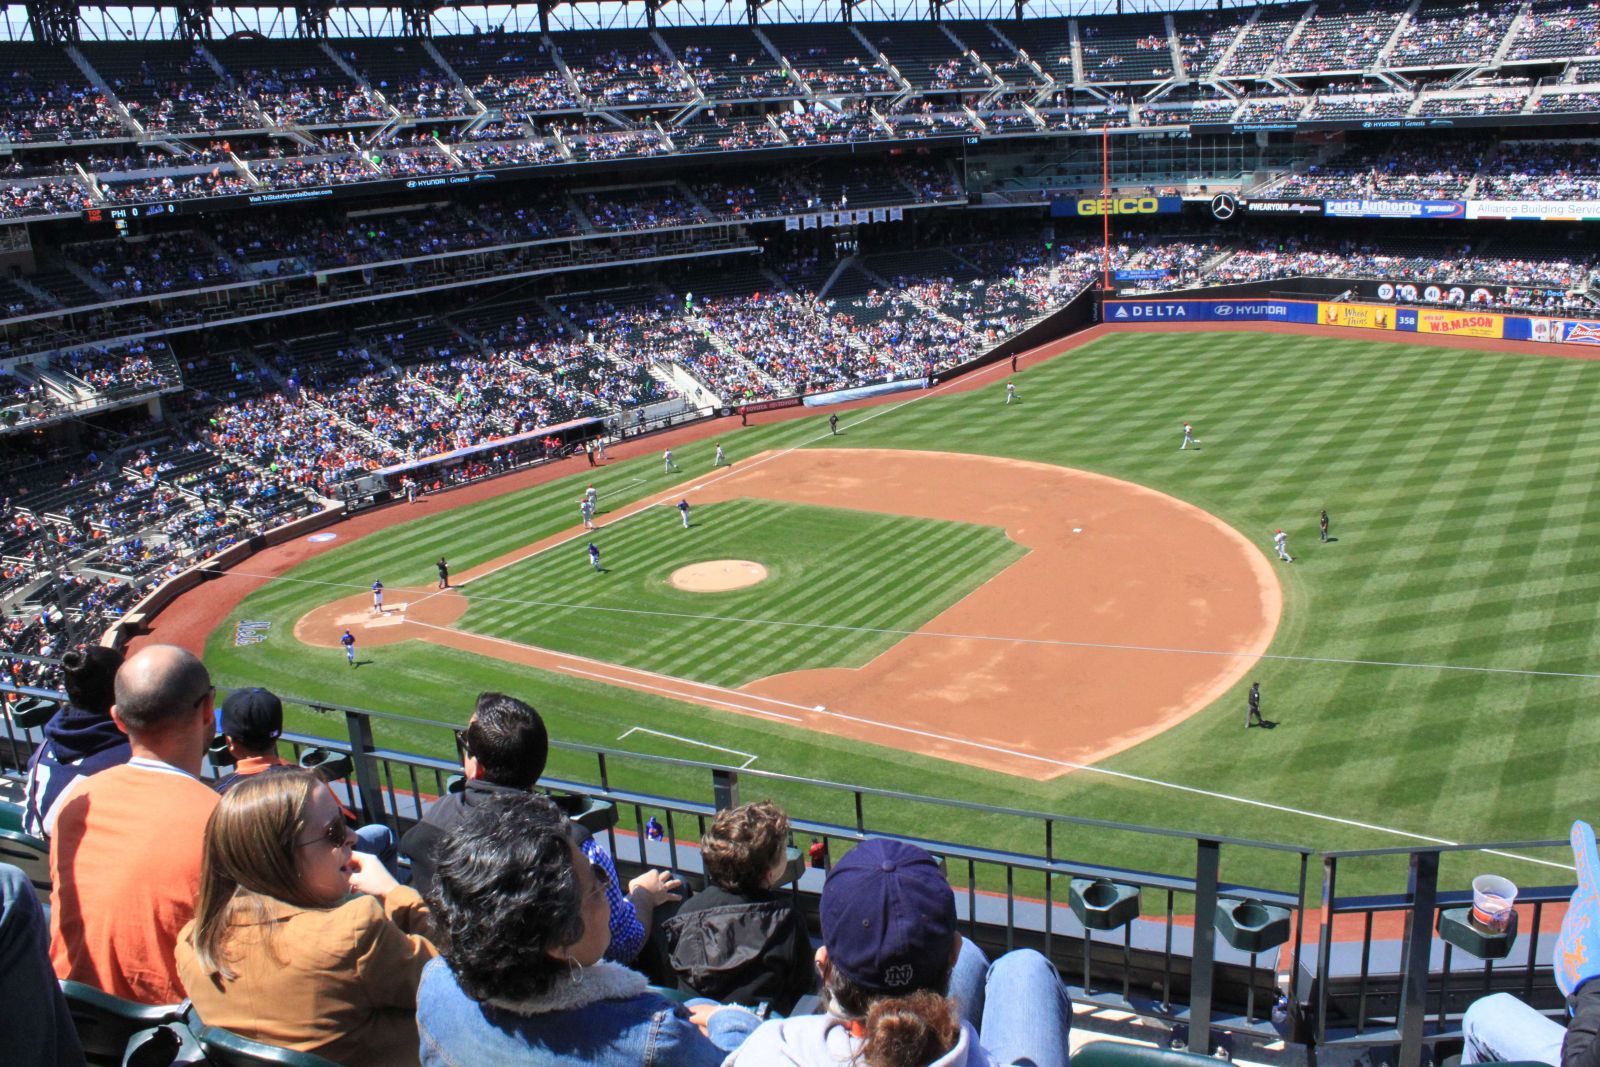 section 405, row 4 seat view  - citi field